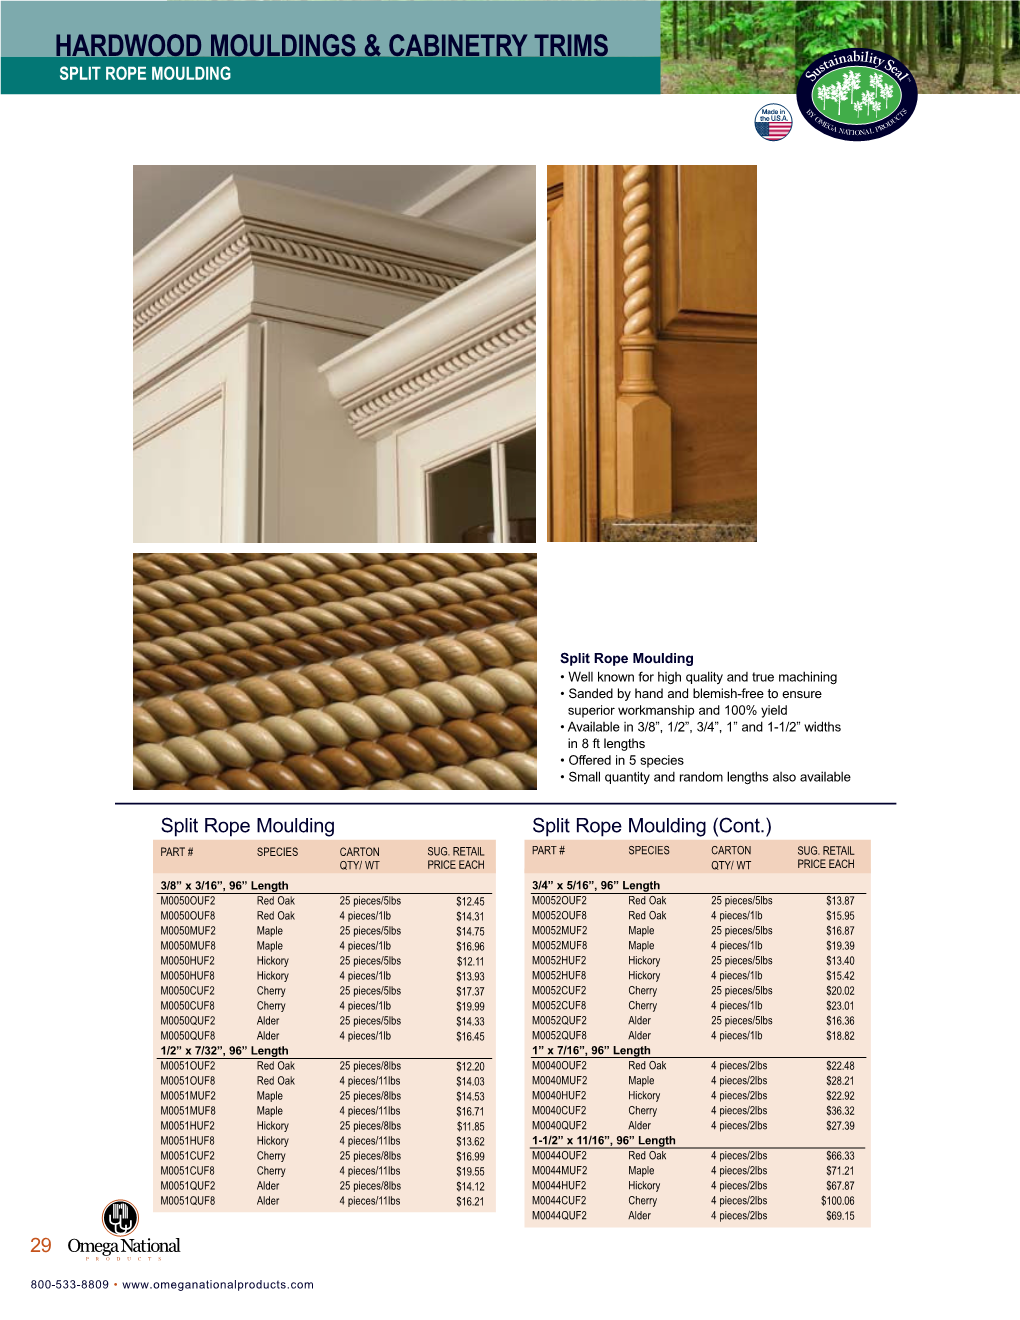 Hardwood Mouldings & Cabinetry Trims